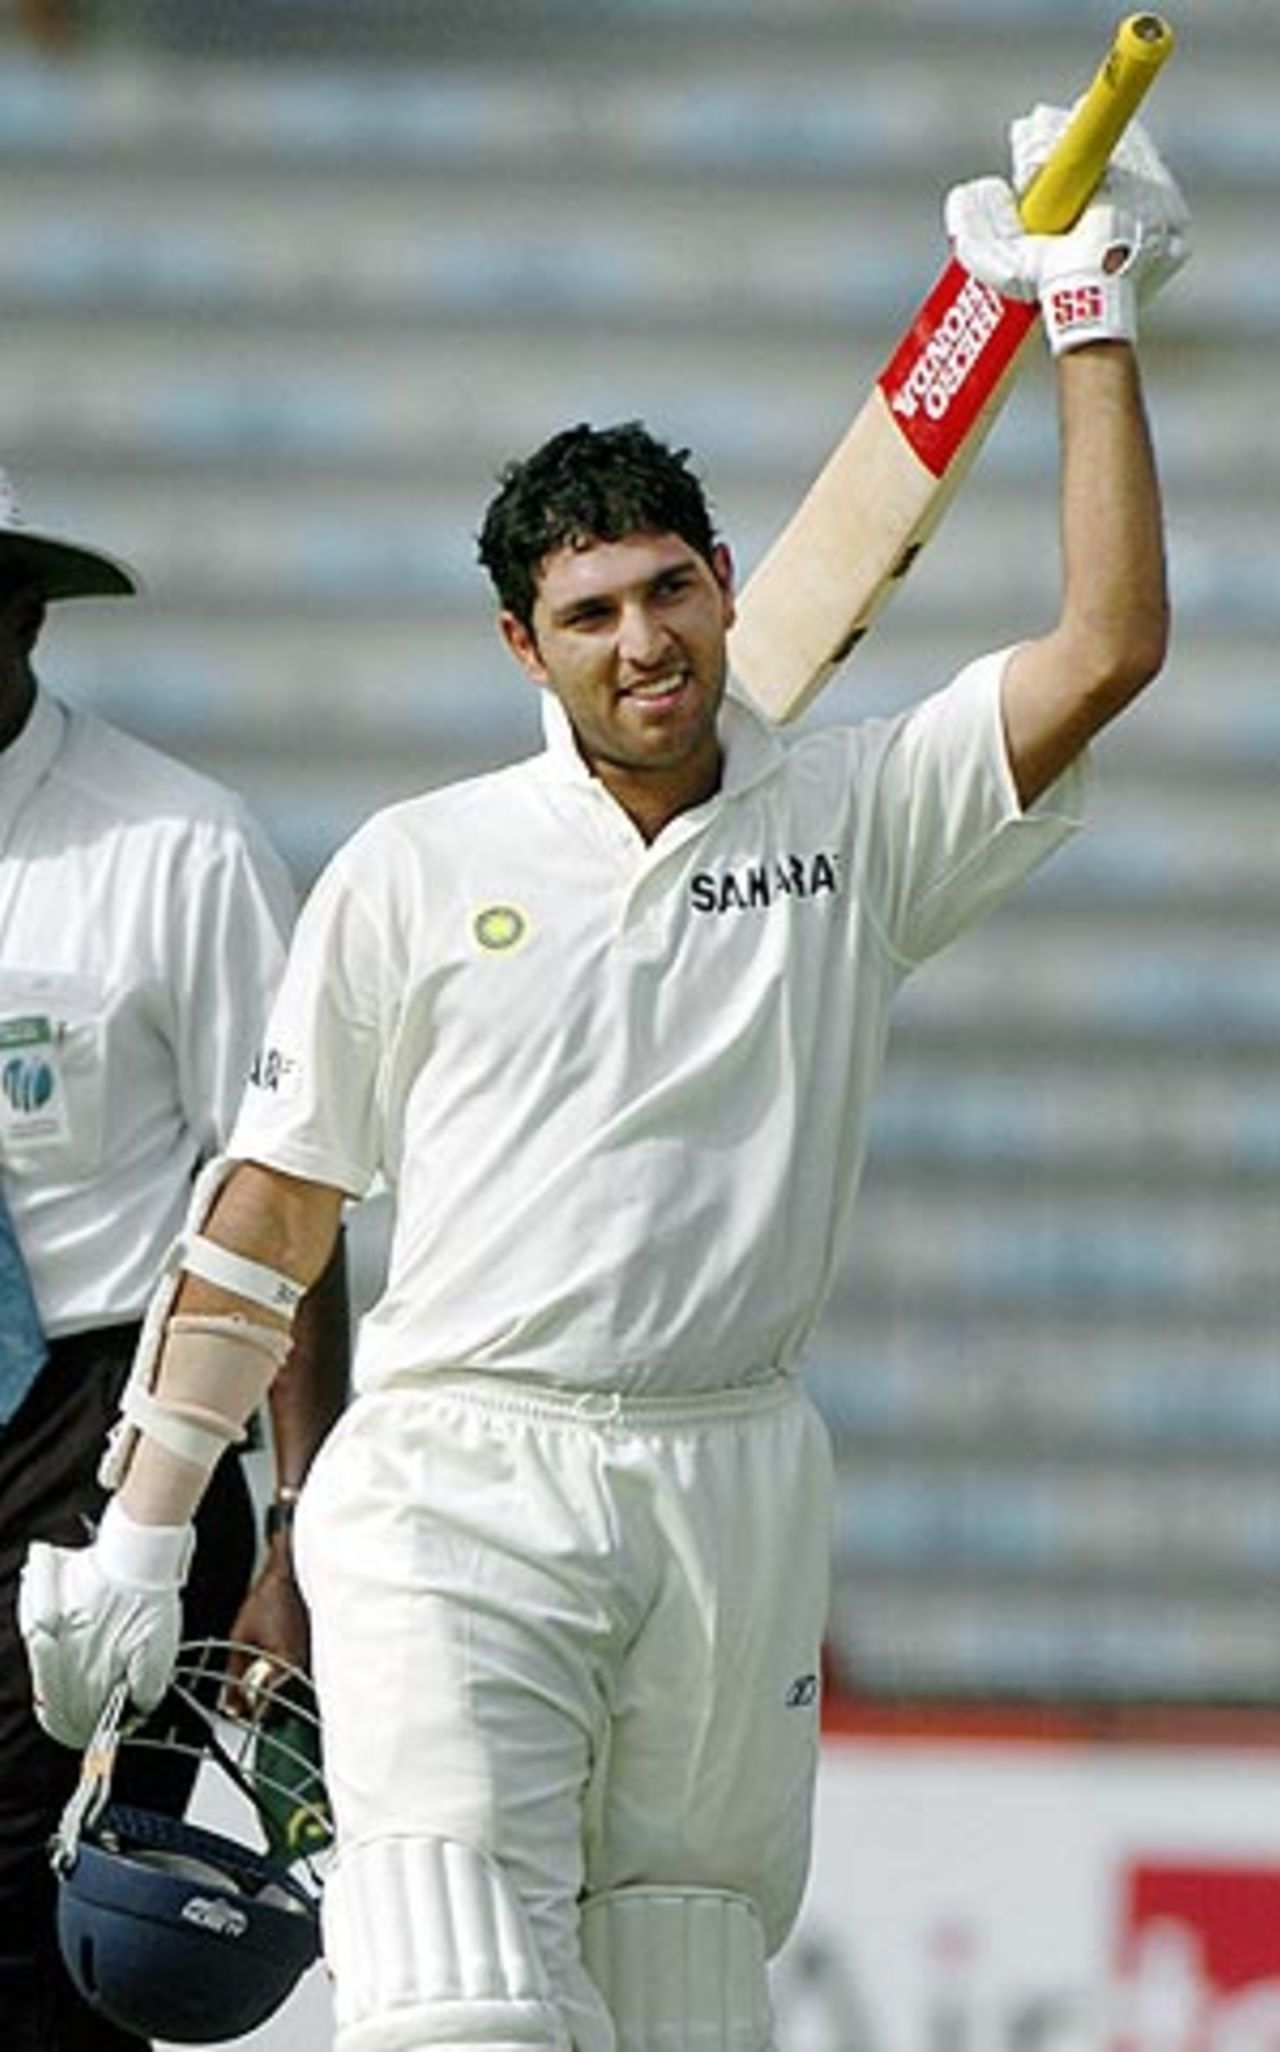 Yuvraj Singh announces his Test talent with a century off only 110 balls, Pakistan v India, 2nd Test, Lahore, 1st day, April 5, 2004